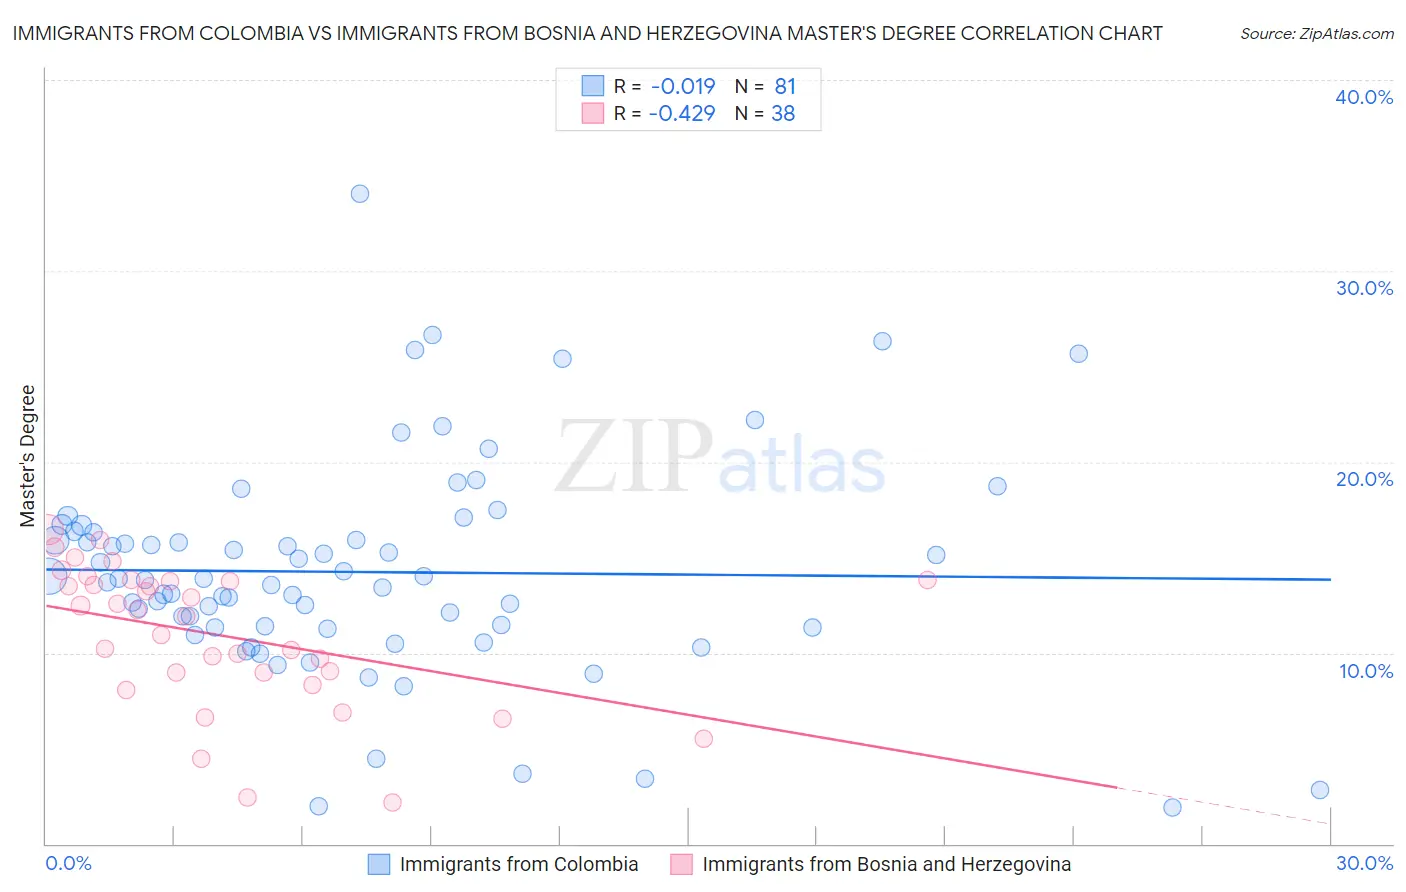 Immigrants from Colombia vs Immigrants from Bosnia and Herzegovina Master's Degree